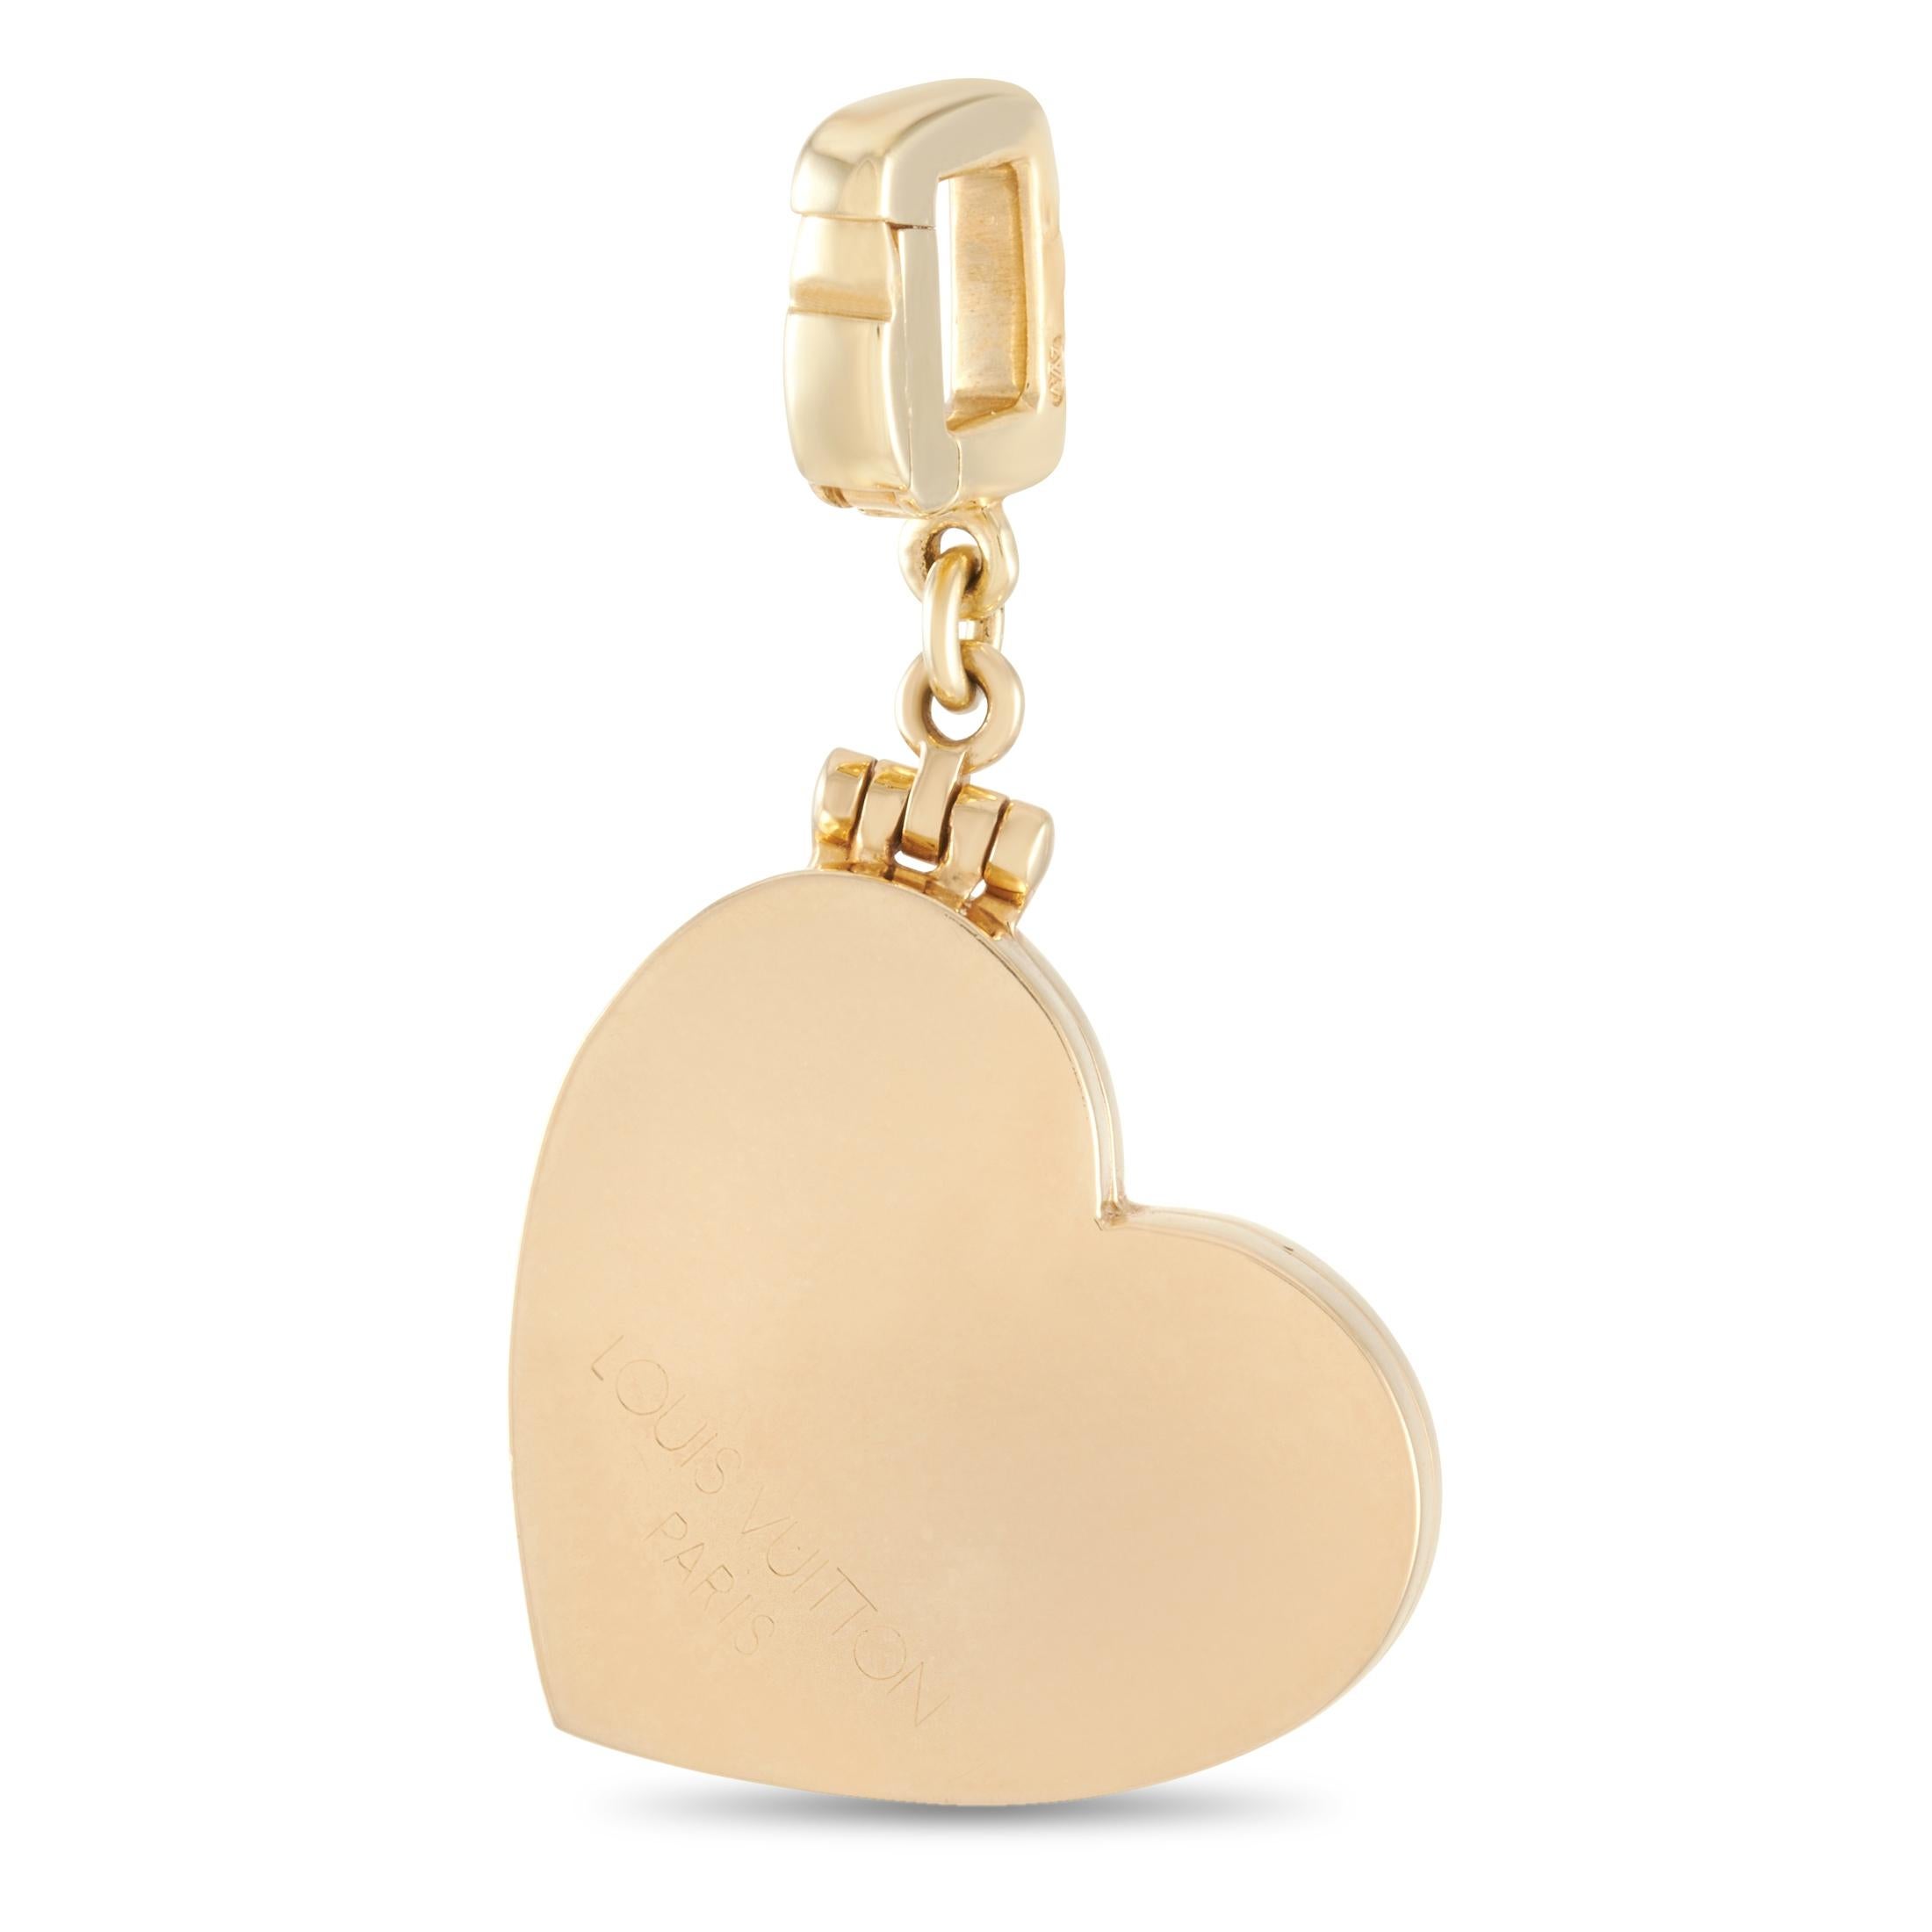 This Louis Vuitton heart locket charm pendant is made of 18K yellow gold and weighs 14.7 grams. It measures 1.50” in length and 0.75” in width.
 
 The pendant is offered in estate condition and includes the manufacturer’s box.